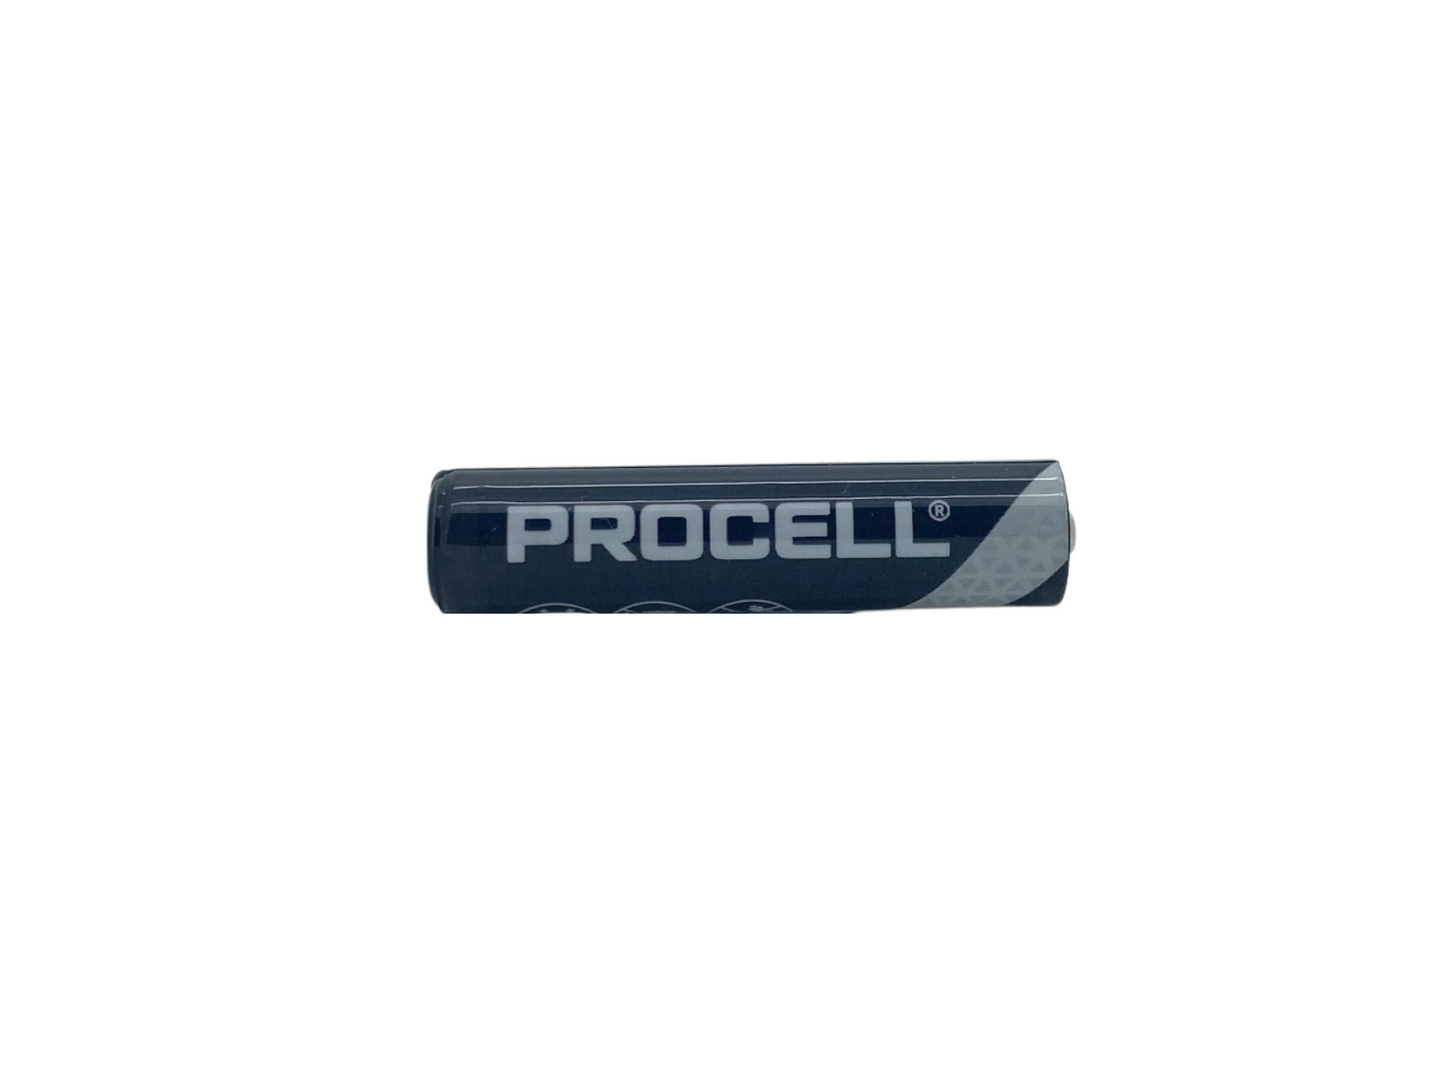 Duracell Procell AAA Batteries 10 Pack